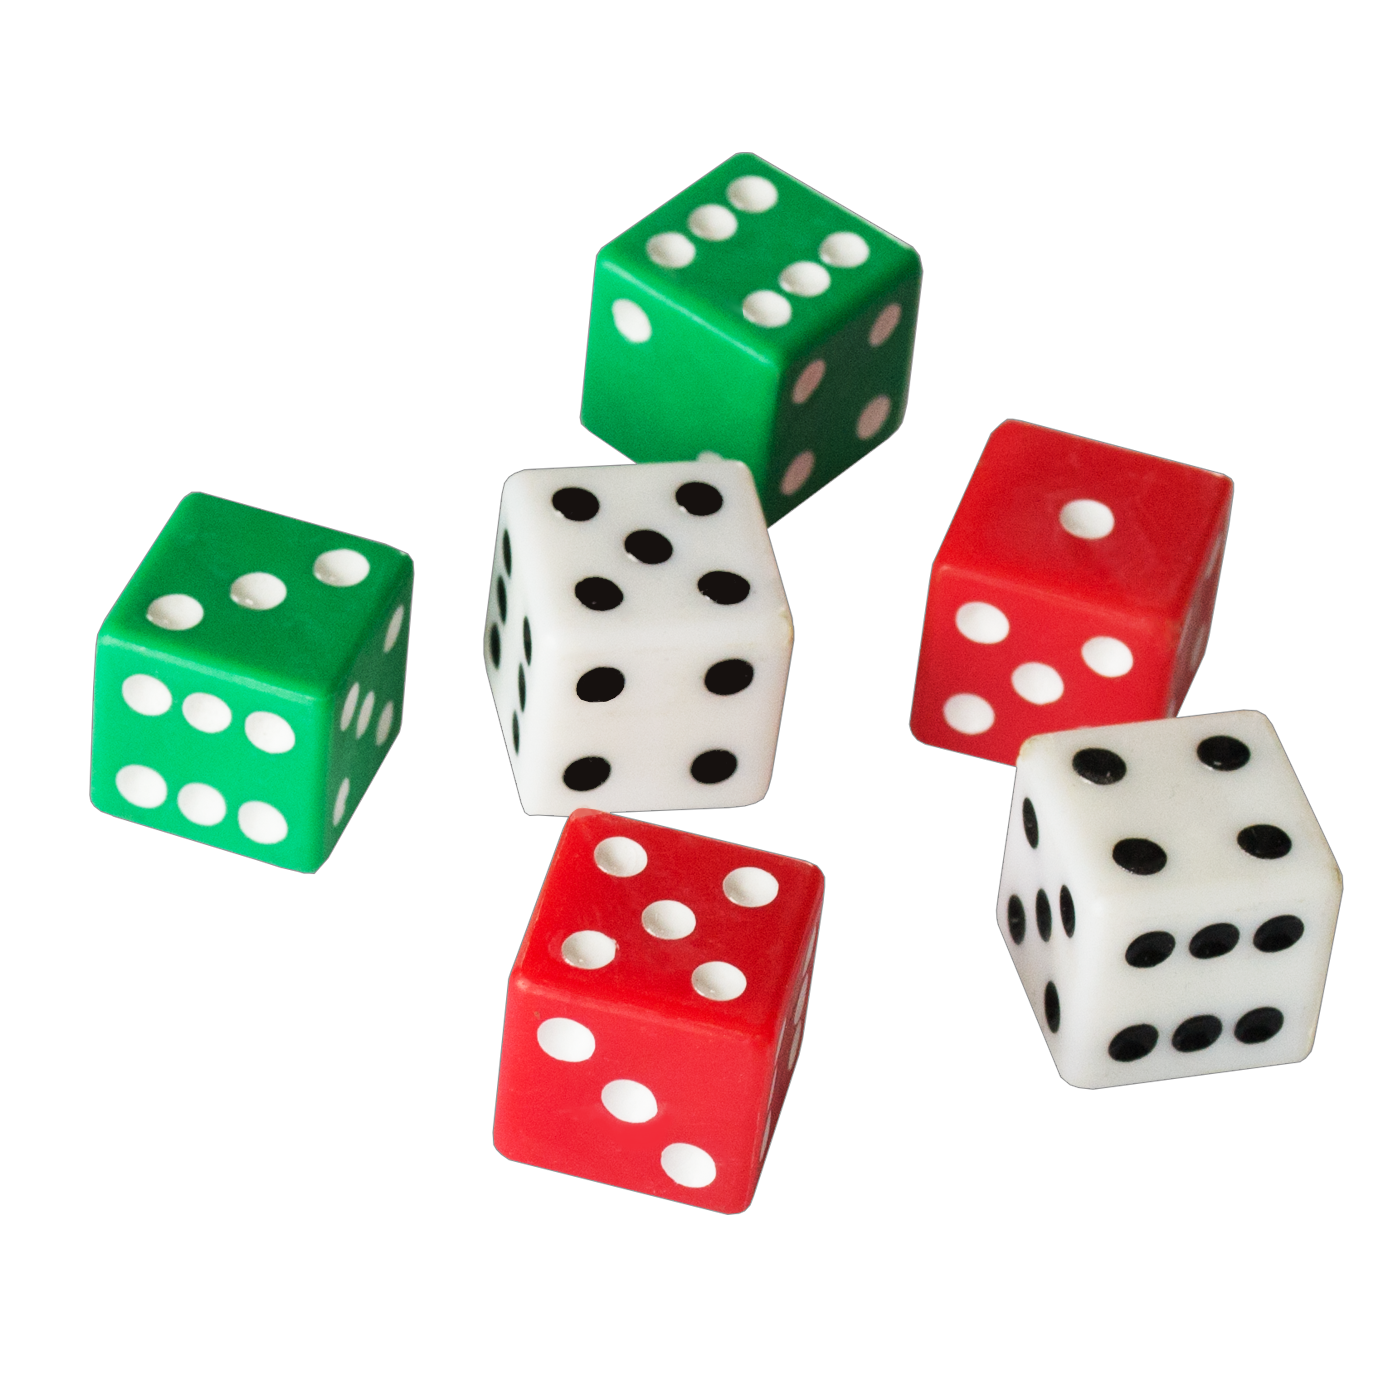 Dice Plastic 15mm Pack of 3 [Red, Green & White]